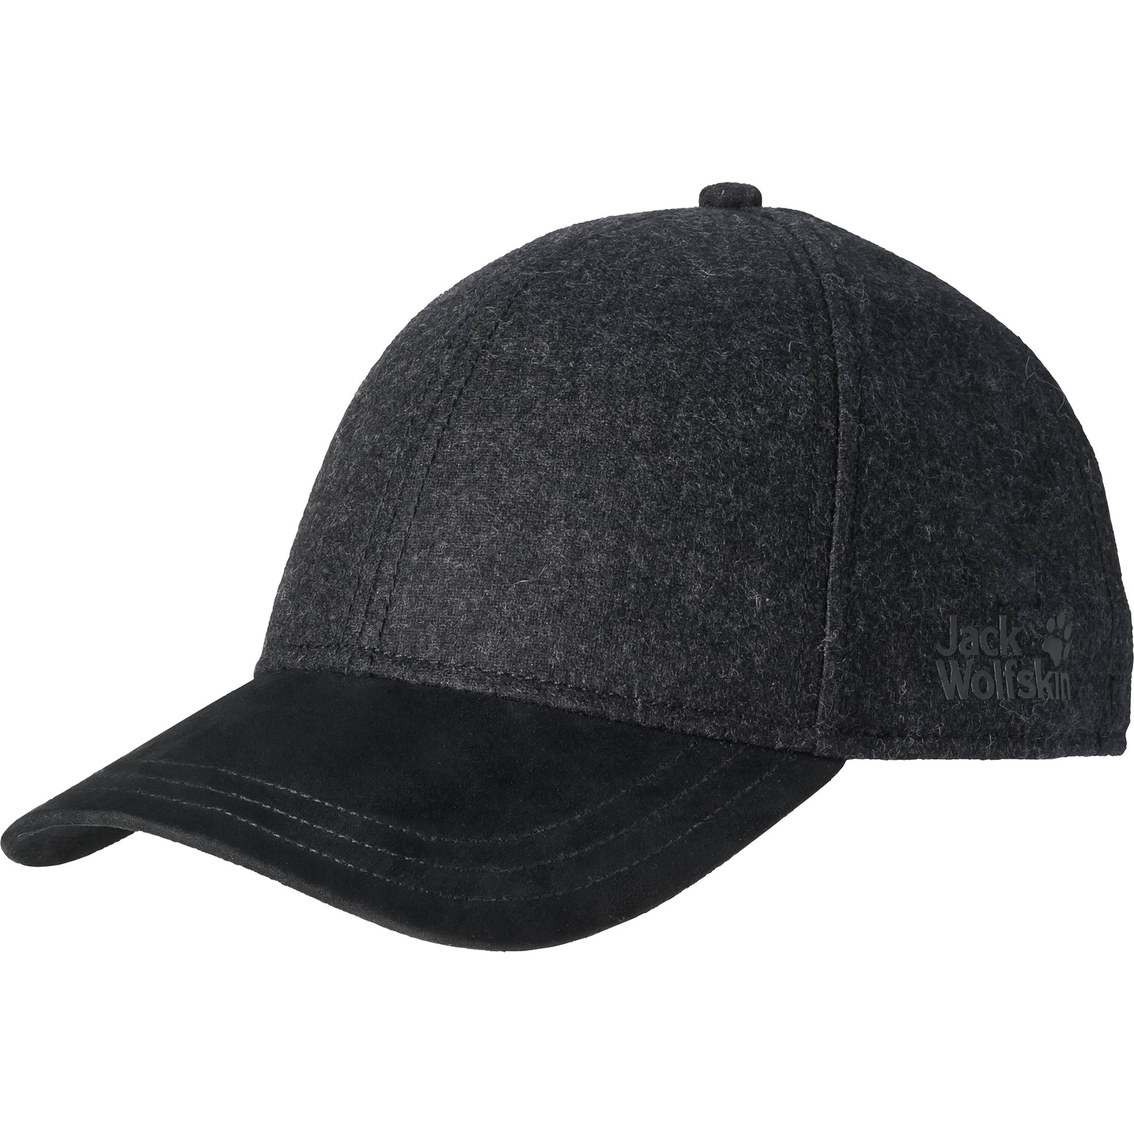 Accessories & | Frost Jack Visors Exchange | Flanell Clothing & Wolfskin | The Hats Shop Cap